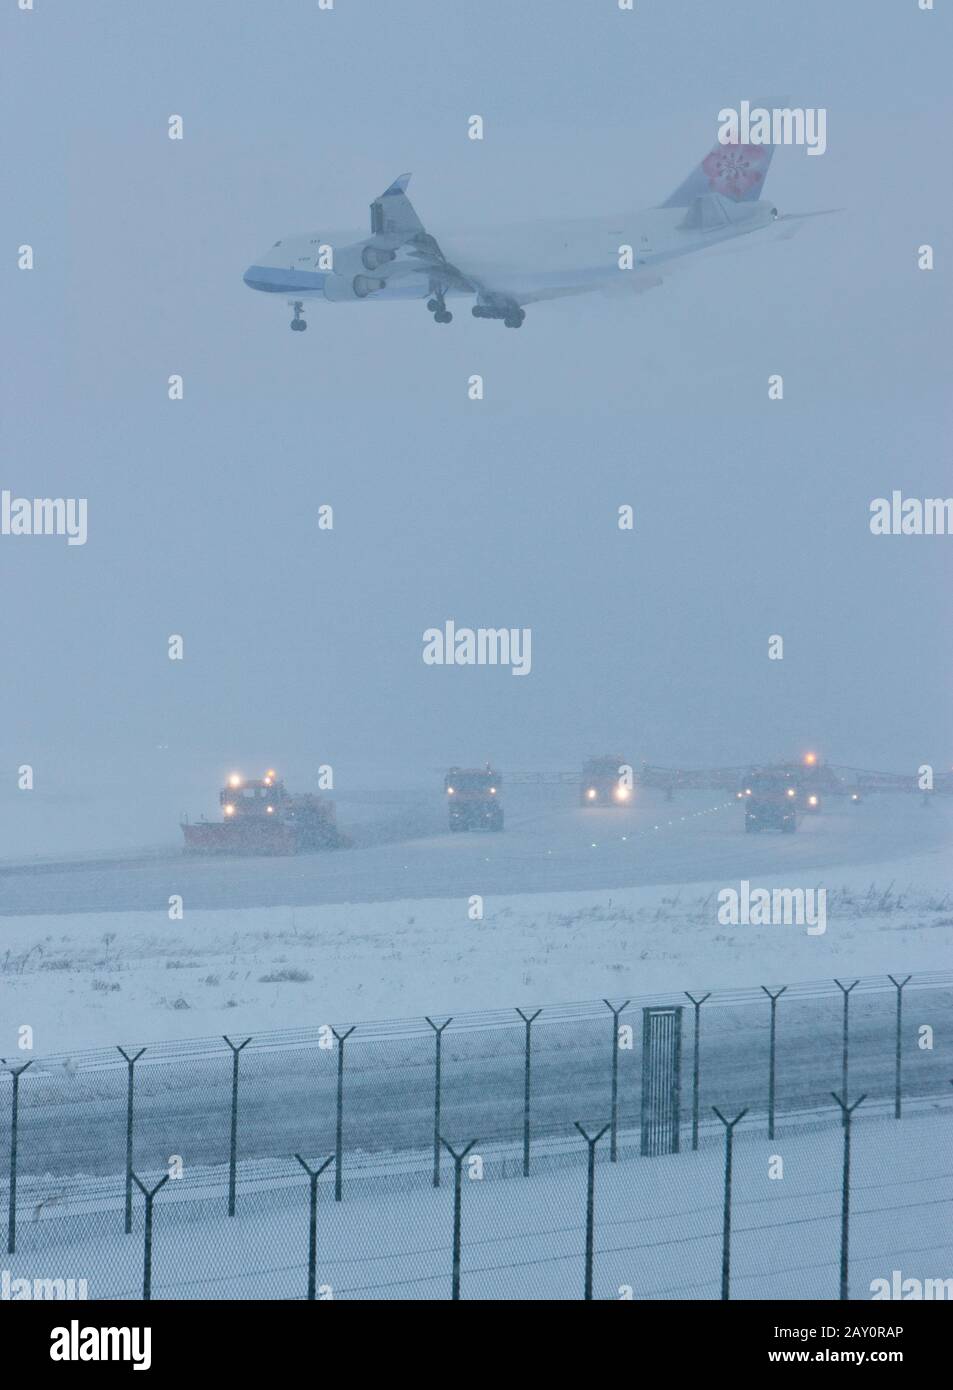 A Boeing 747 of China Airlines lands at Frankfurt Airport in heavy snow Stock Photo